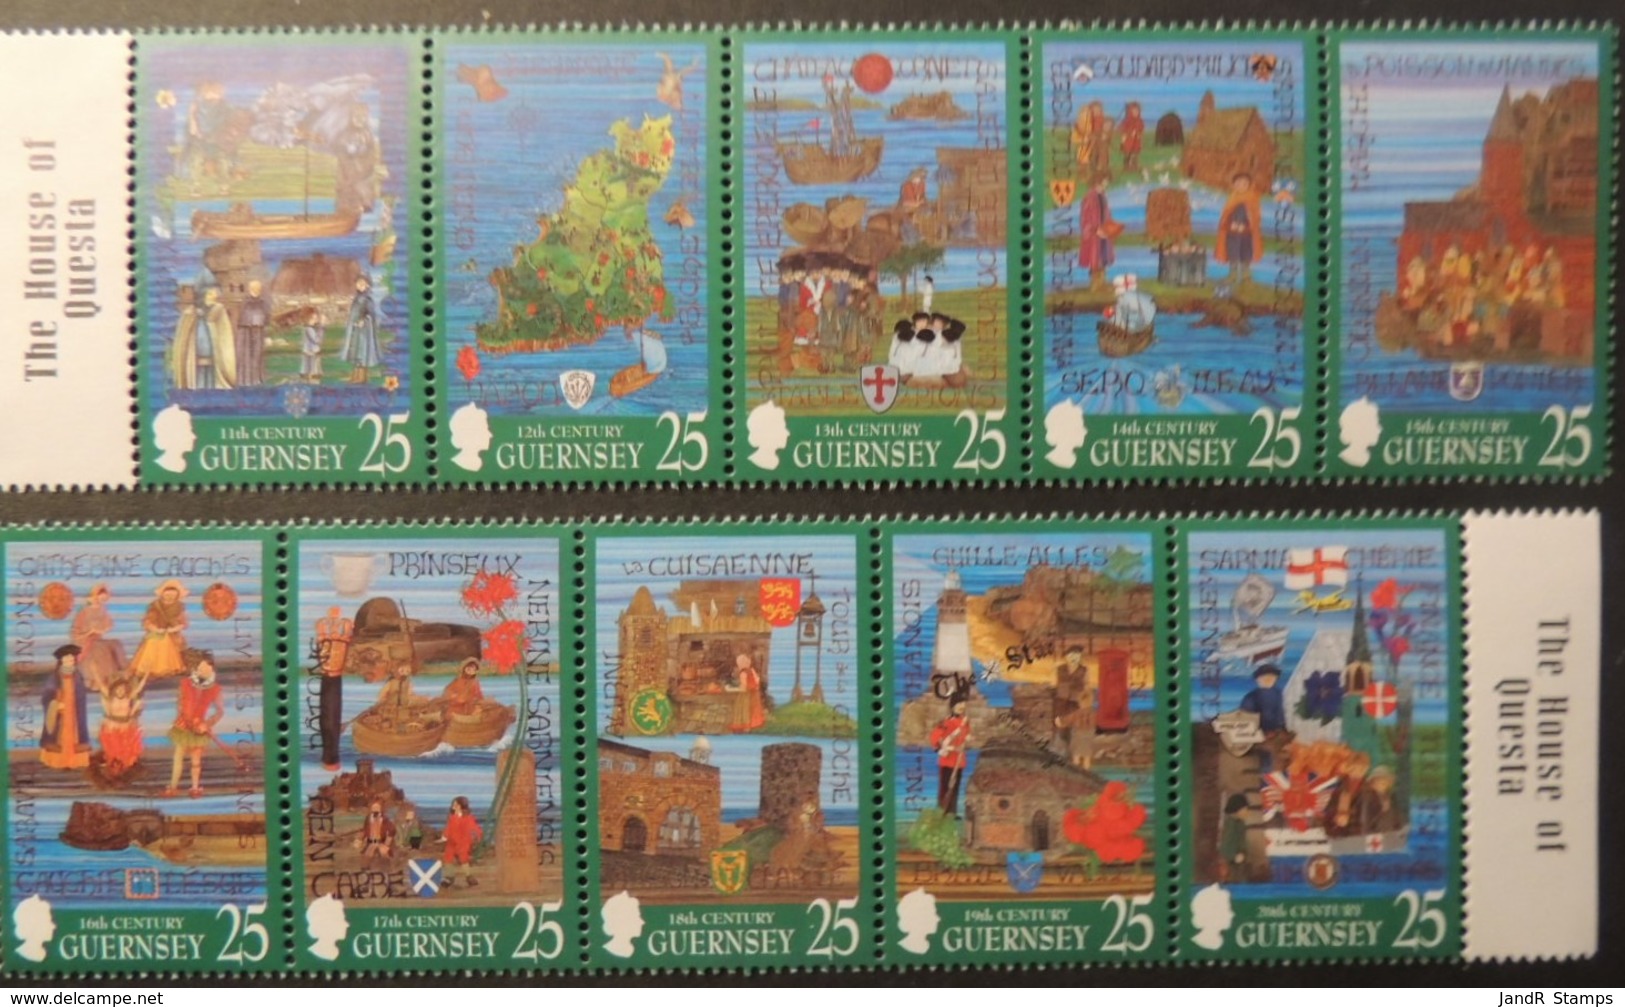 GUERNSEY 1998 MILLENIUM TAPESTRIES SG760-769 MNH 10 VALUES - Guernesey